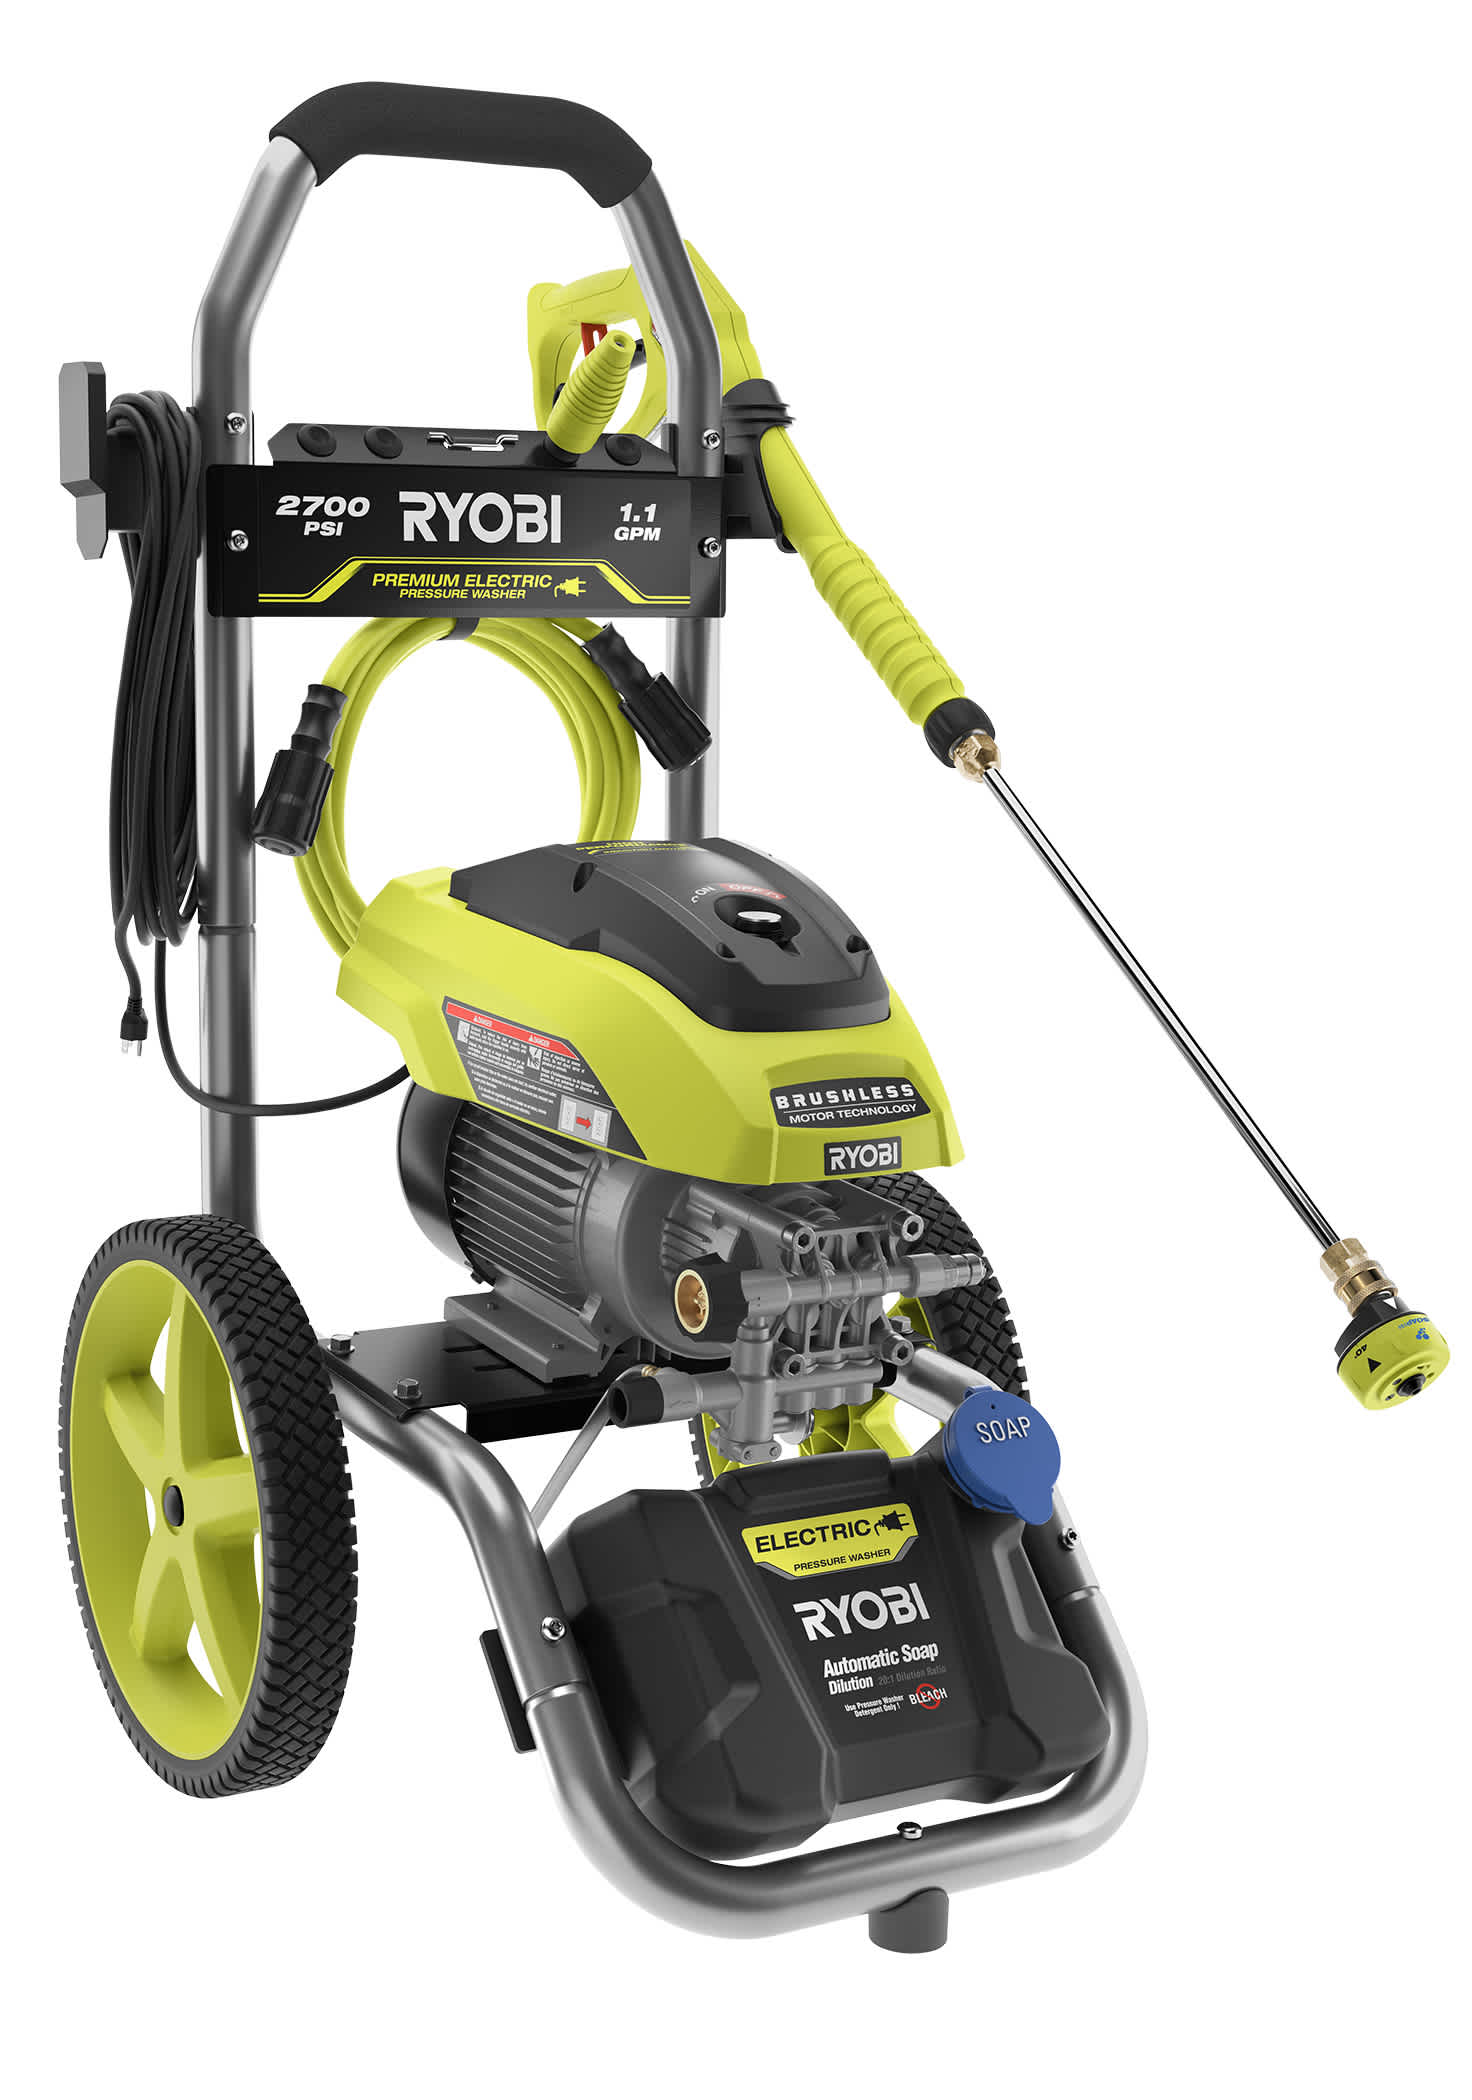 Feature Image for 2700 PSI 1.1 GPM BRUSHLESS ELECTRIC PRESSURE WASHER.